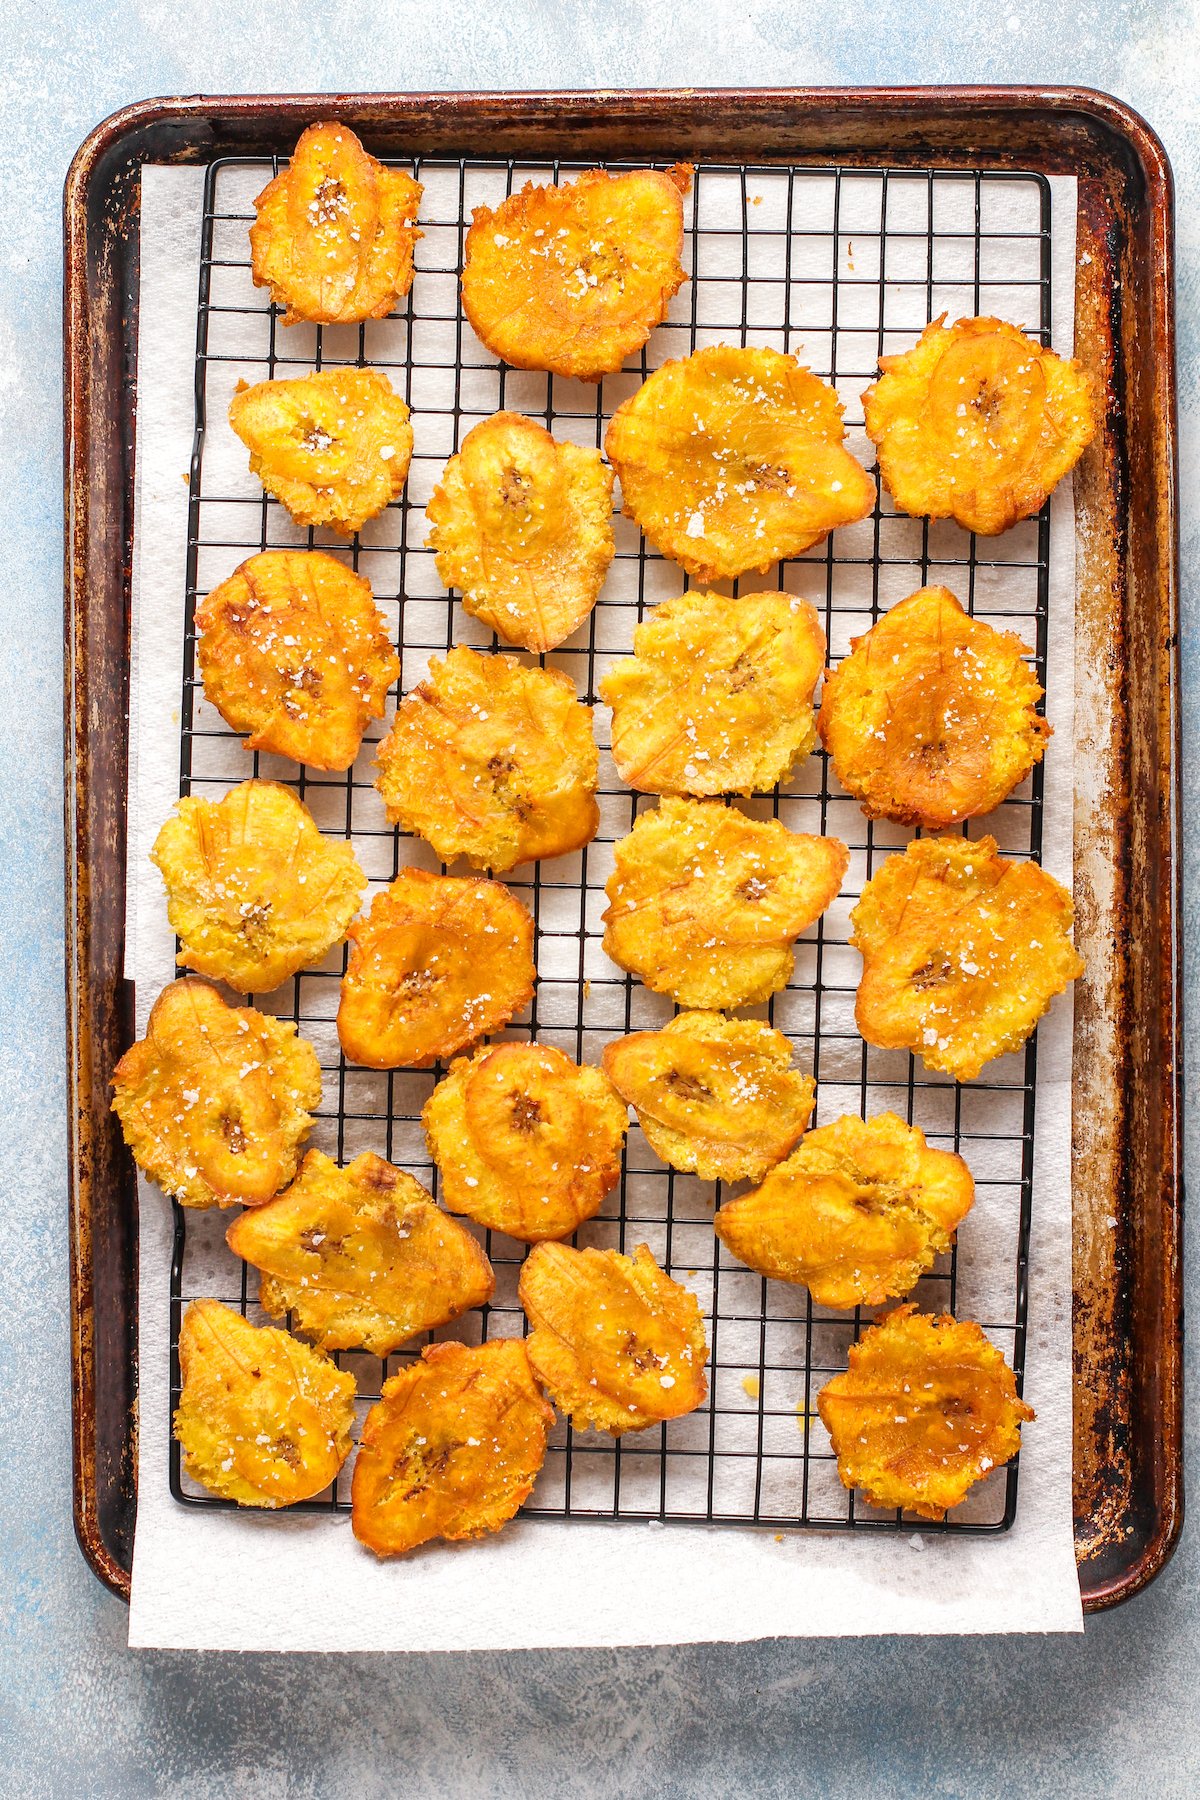 Tostones sprinkled with salt on a cooling rack over paper towels to catch grease.